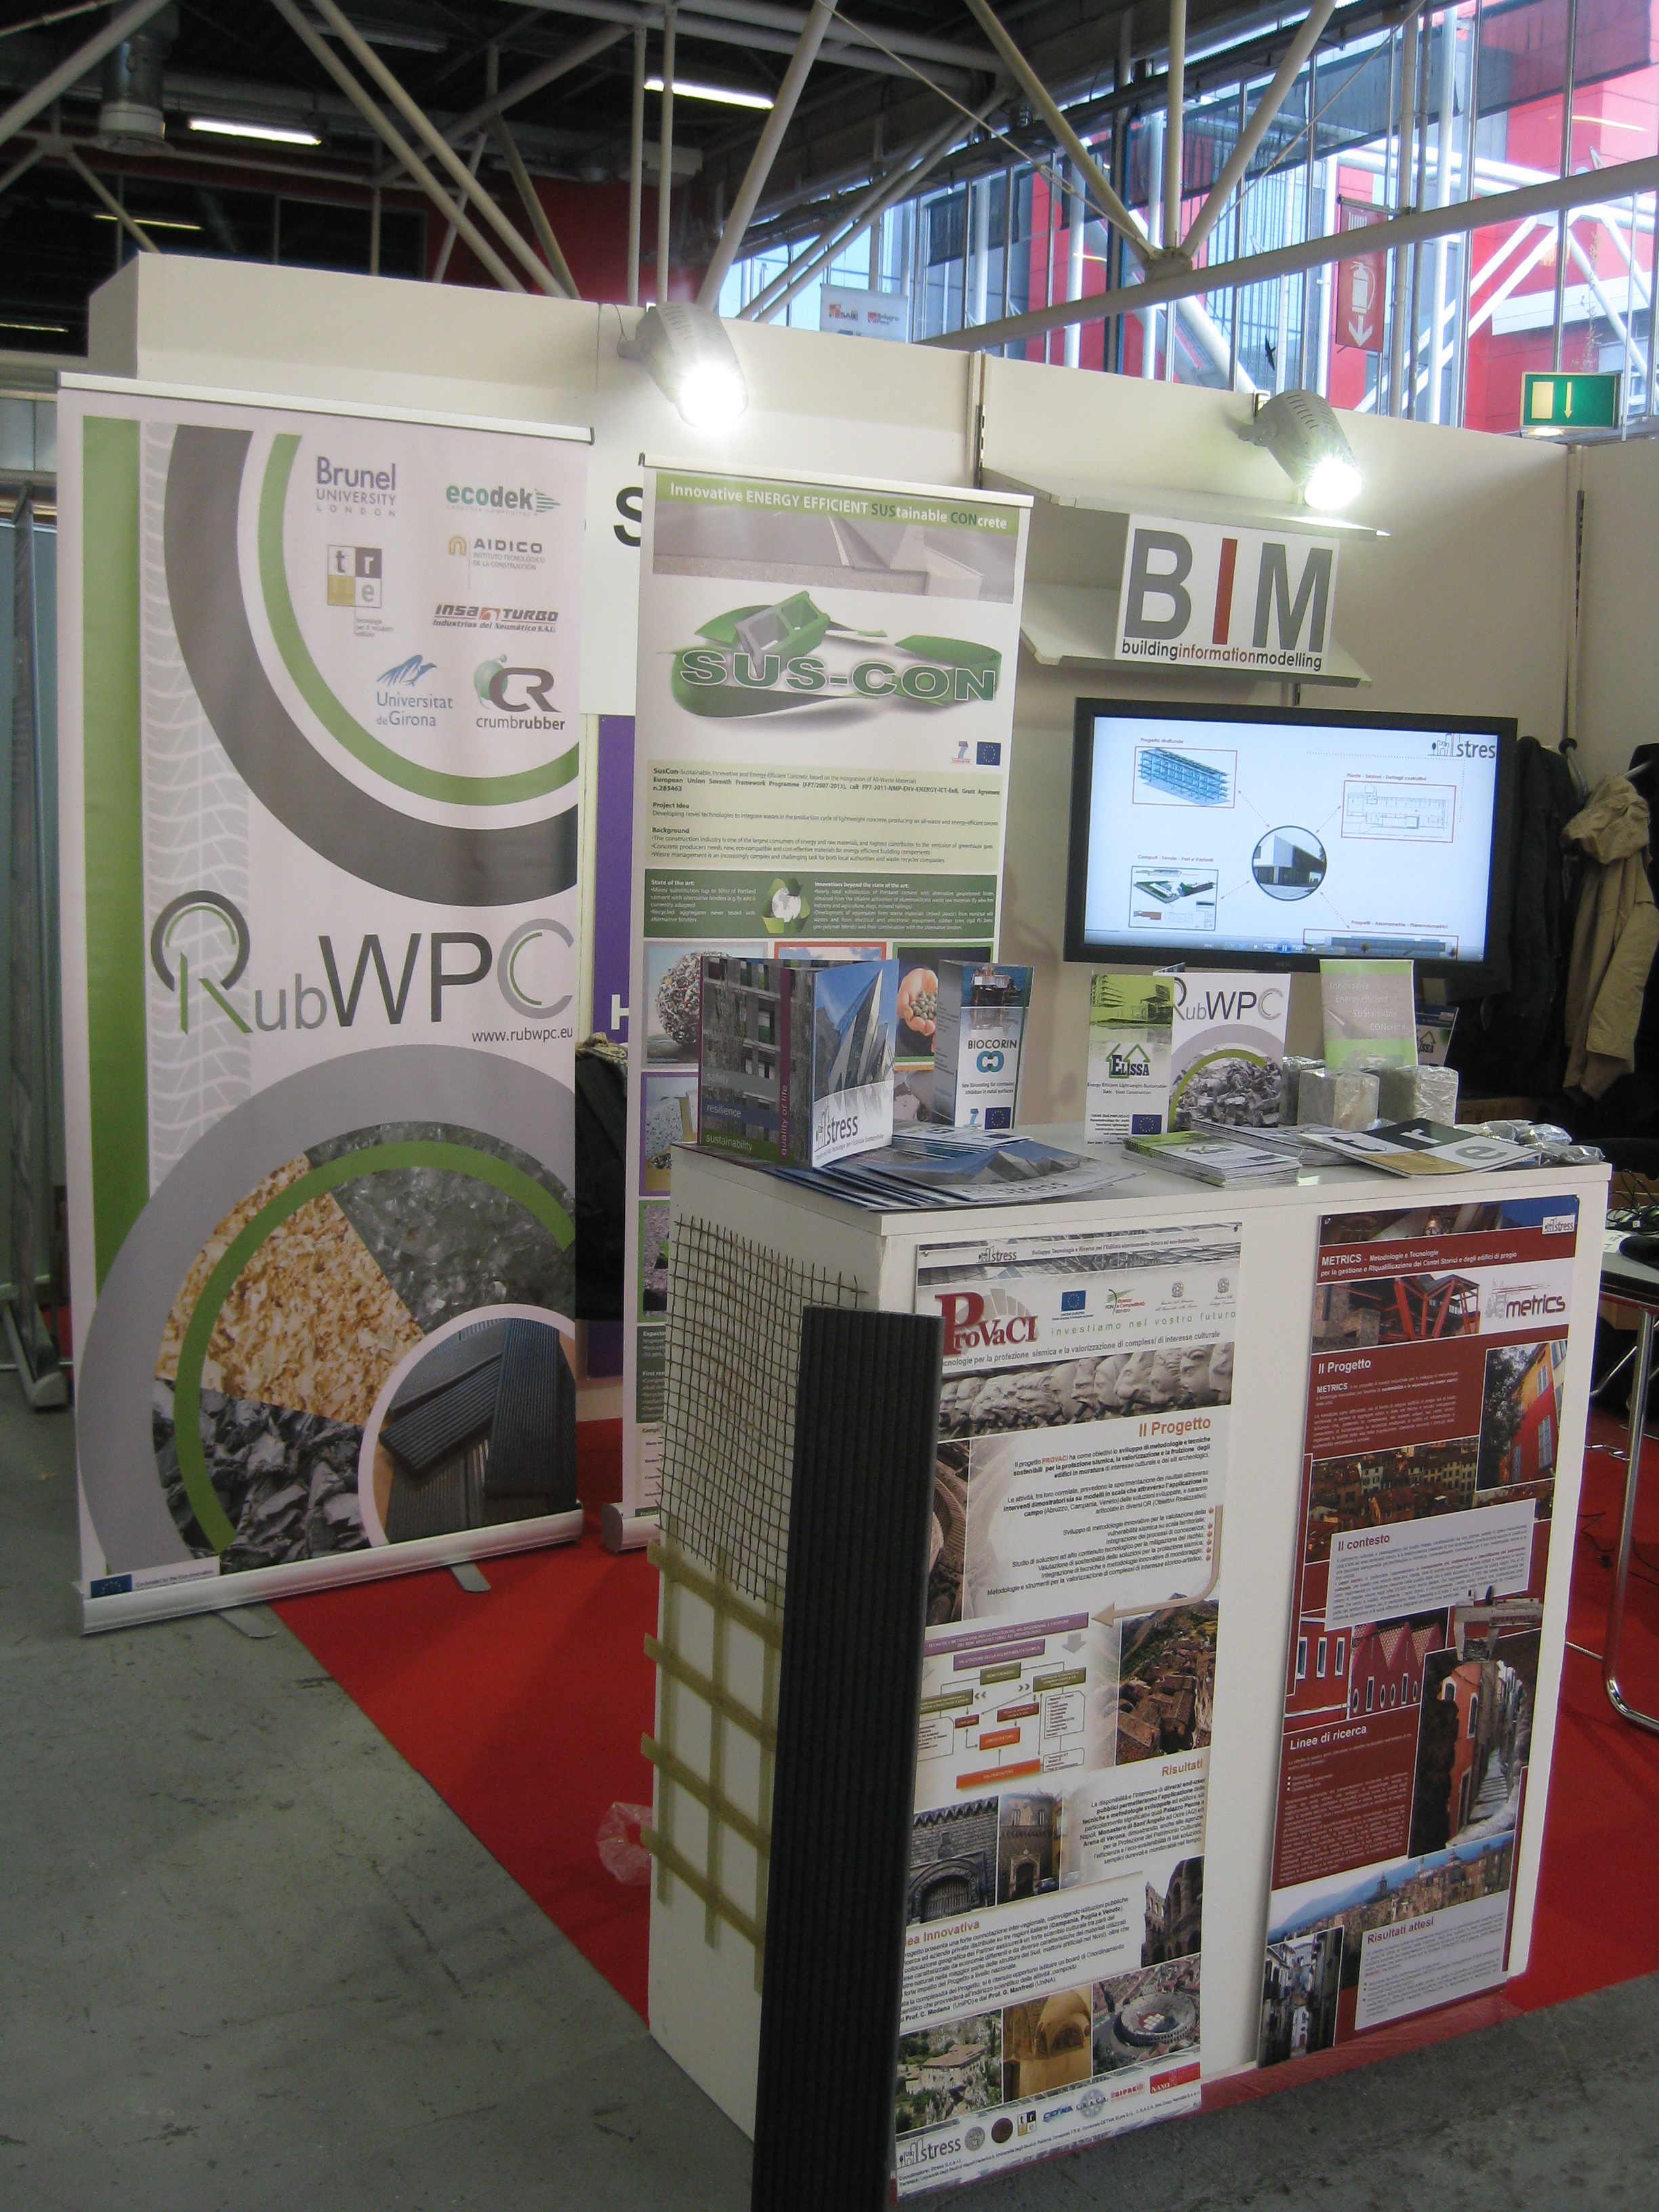 RubWPC at SAIE 2014 in Bologna, Italy